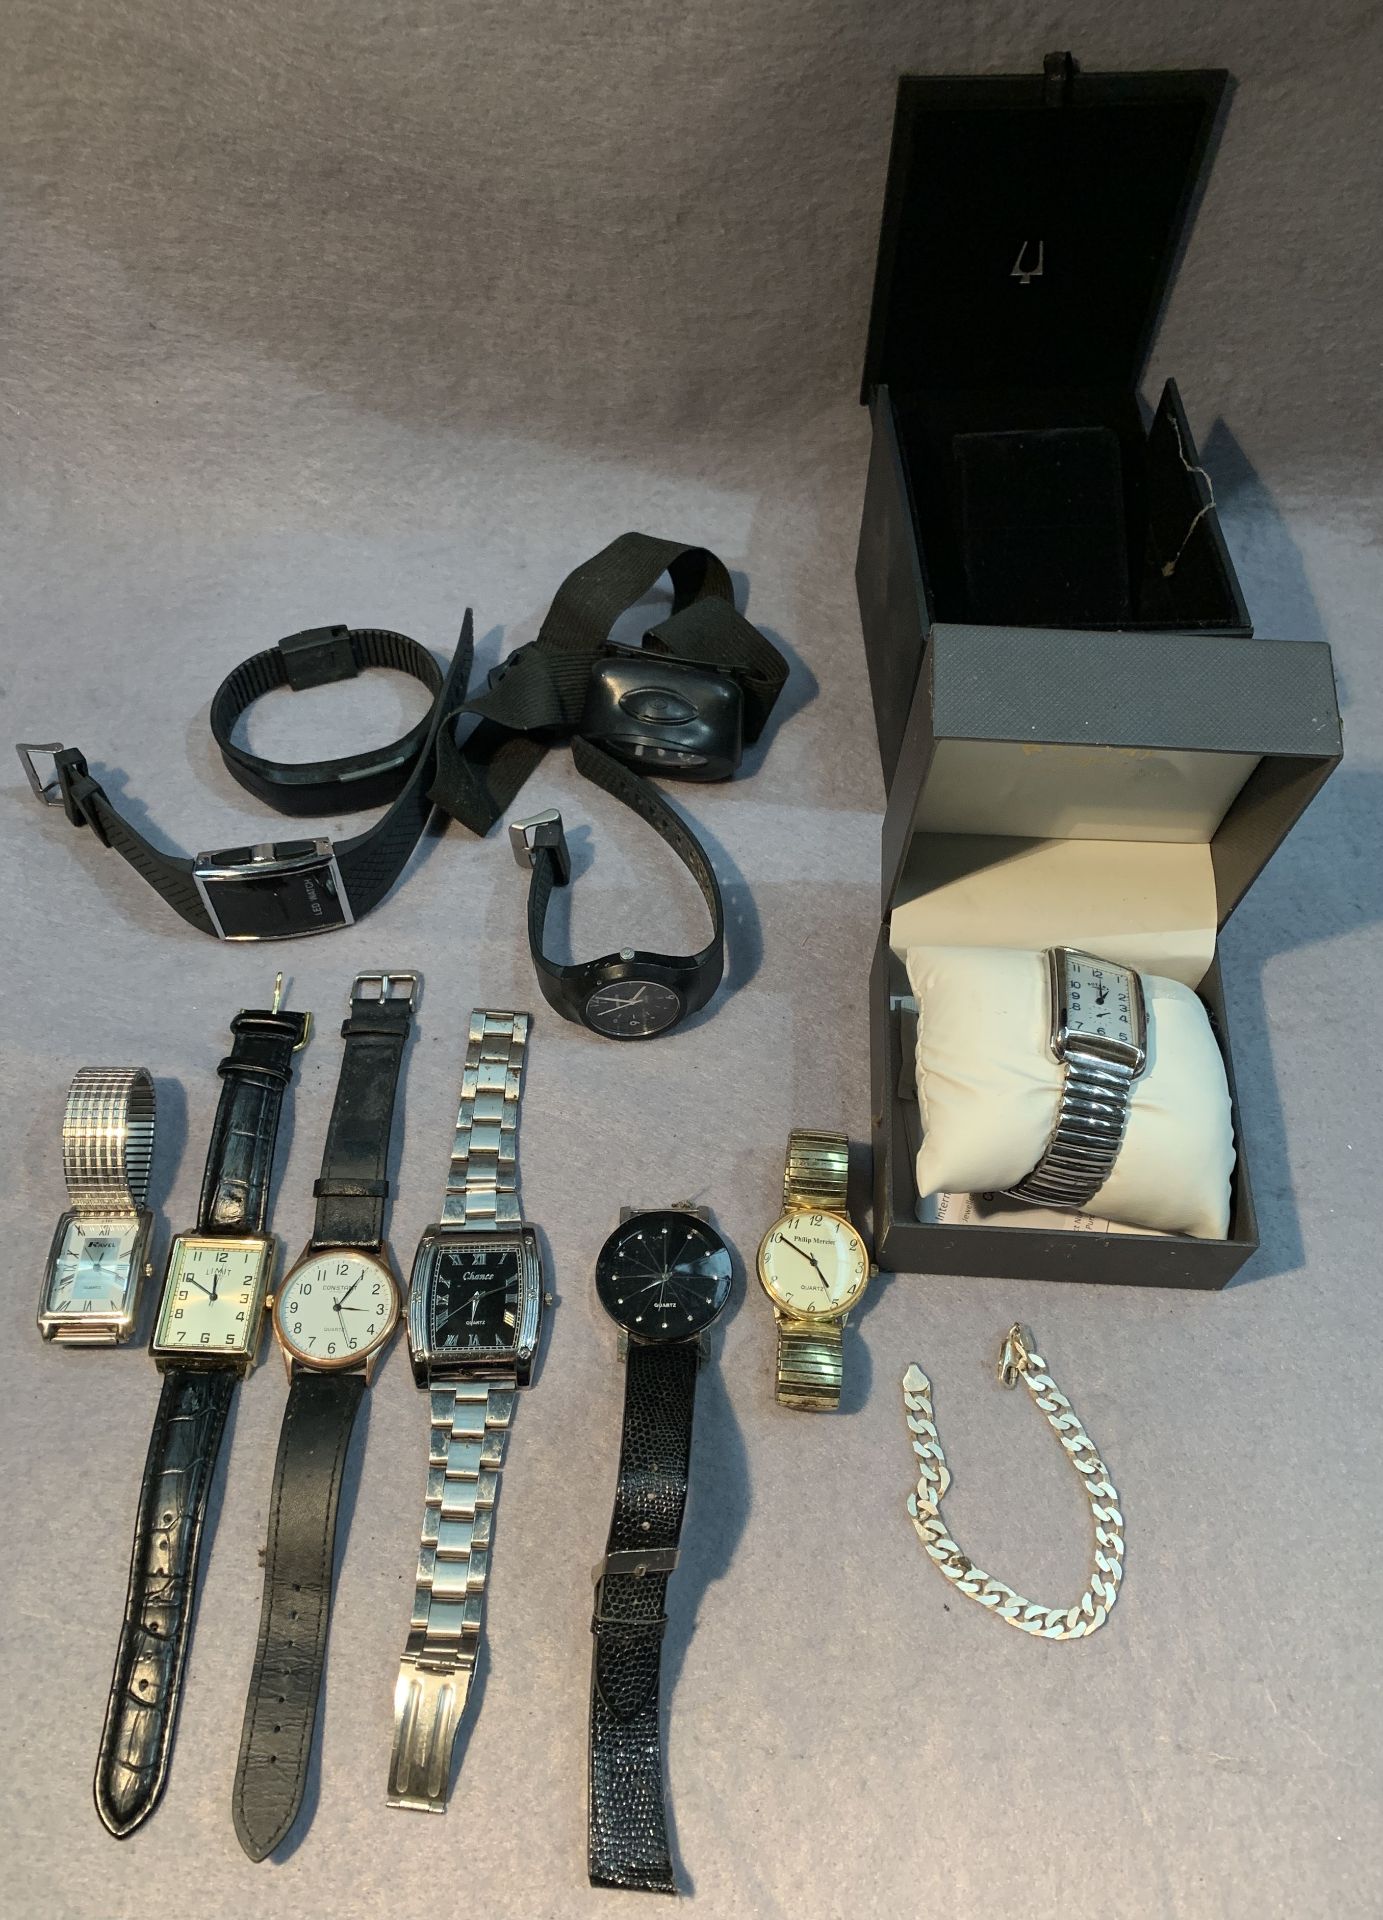 Contents to tray - a Rotary gentleman's wristwatch complete with box and guarantee,